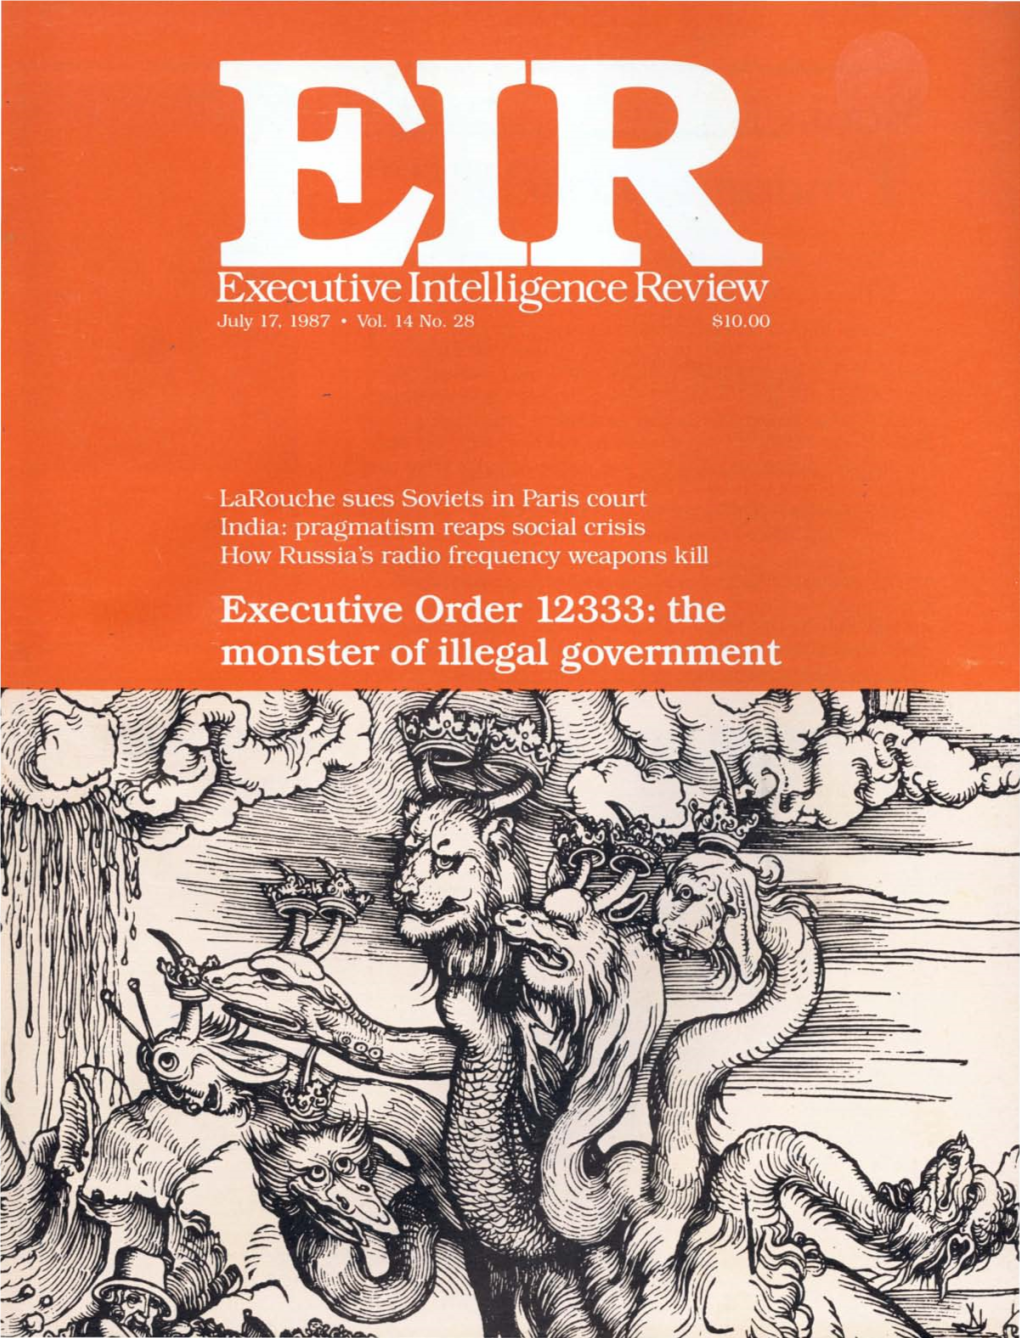 Executive Intelligence Review, Volume 14, Number 28, July 17, 1987